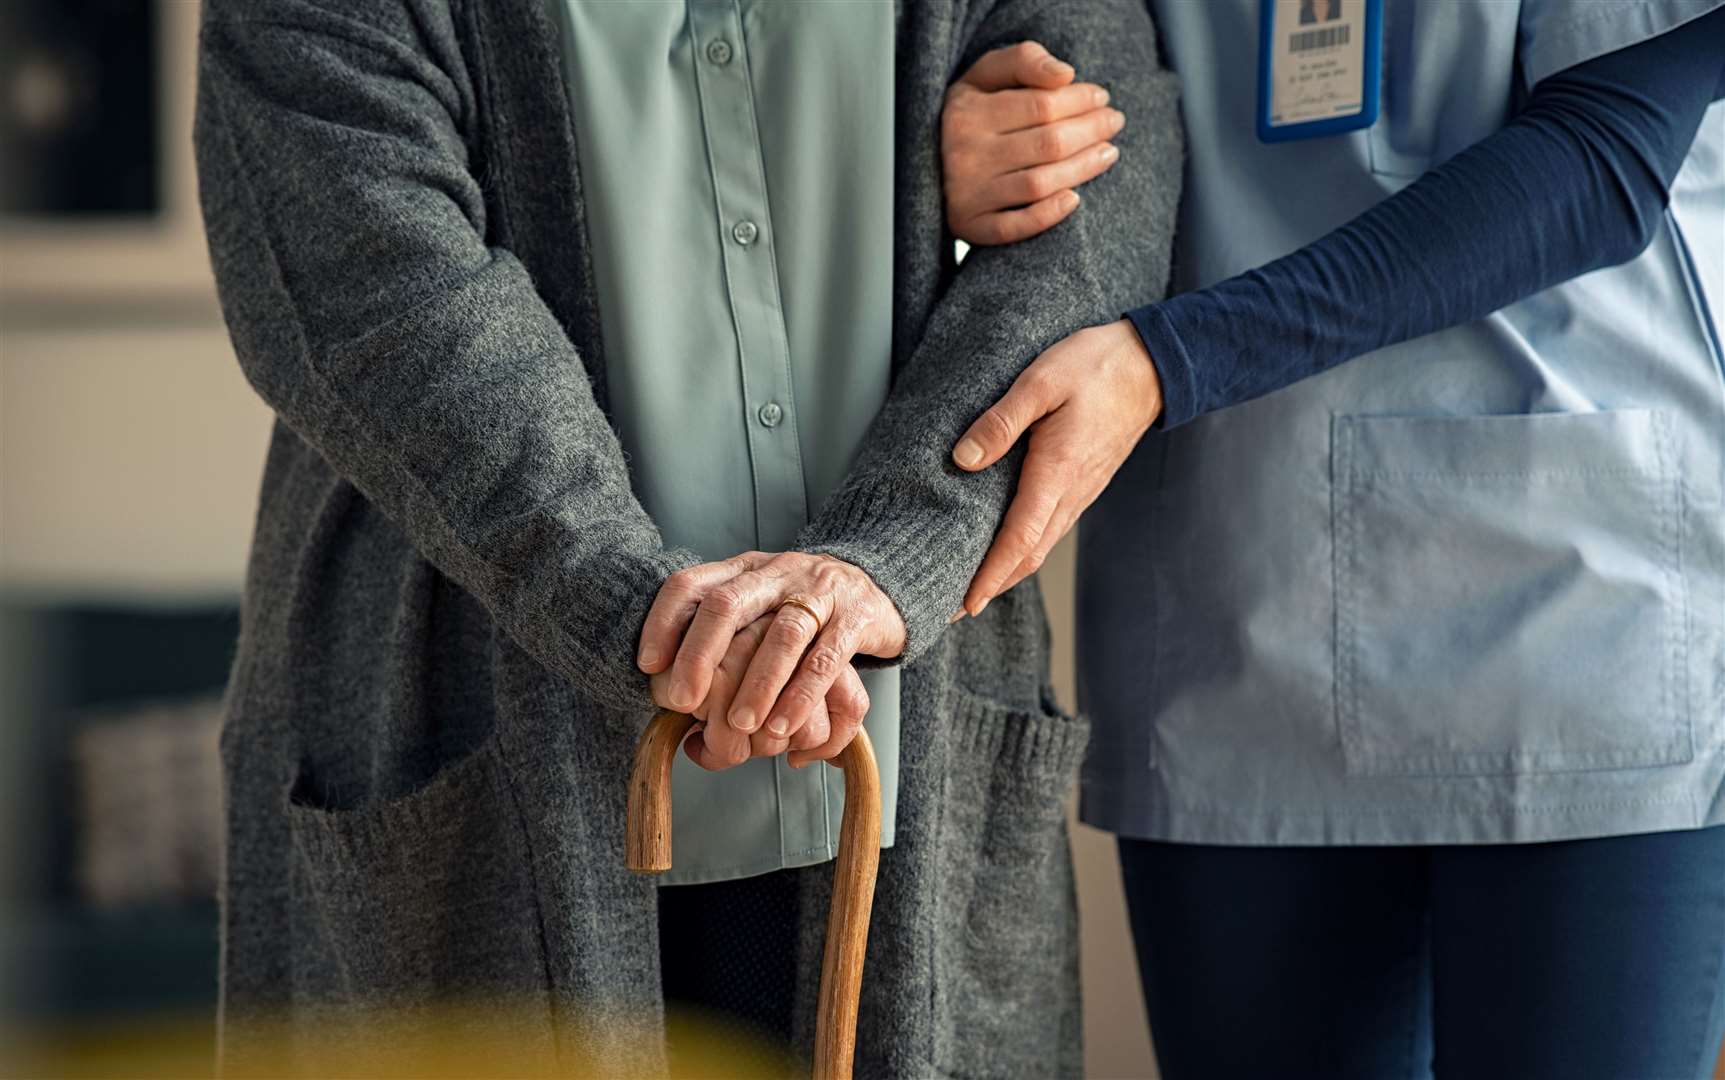 There is a need for new care homes, LNT argues. Picture: iStock